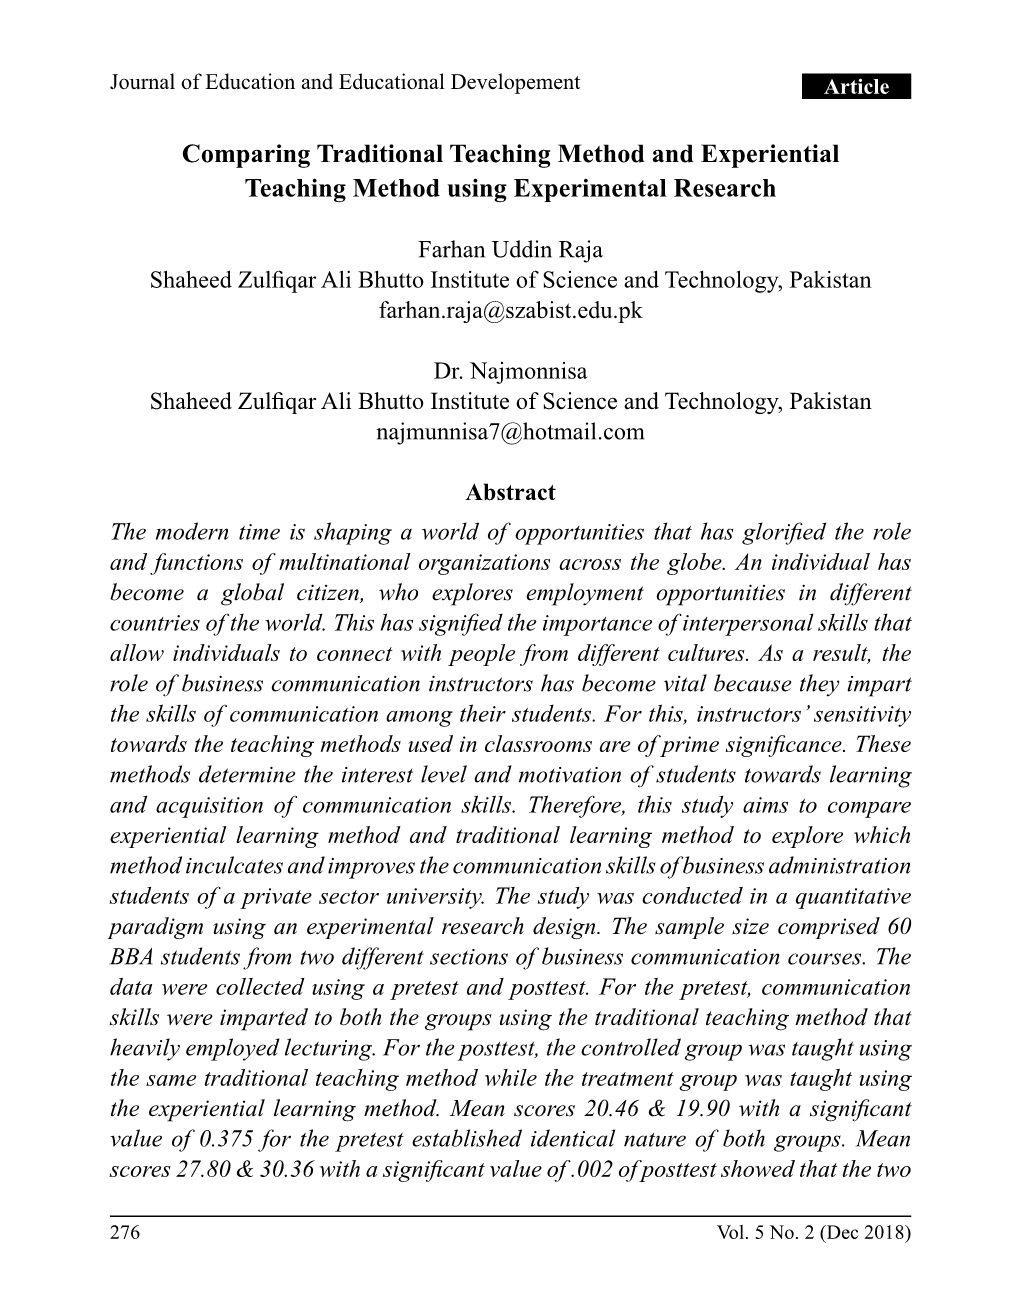 Comparing Traditional Teaching Method and Experiential Teaching Method Using Experimental Research